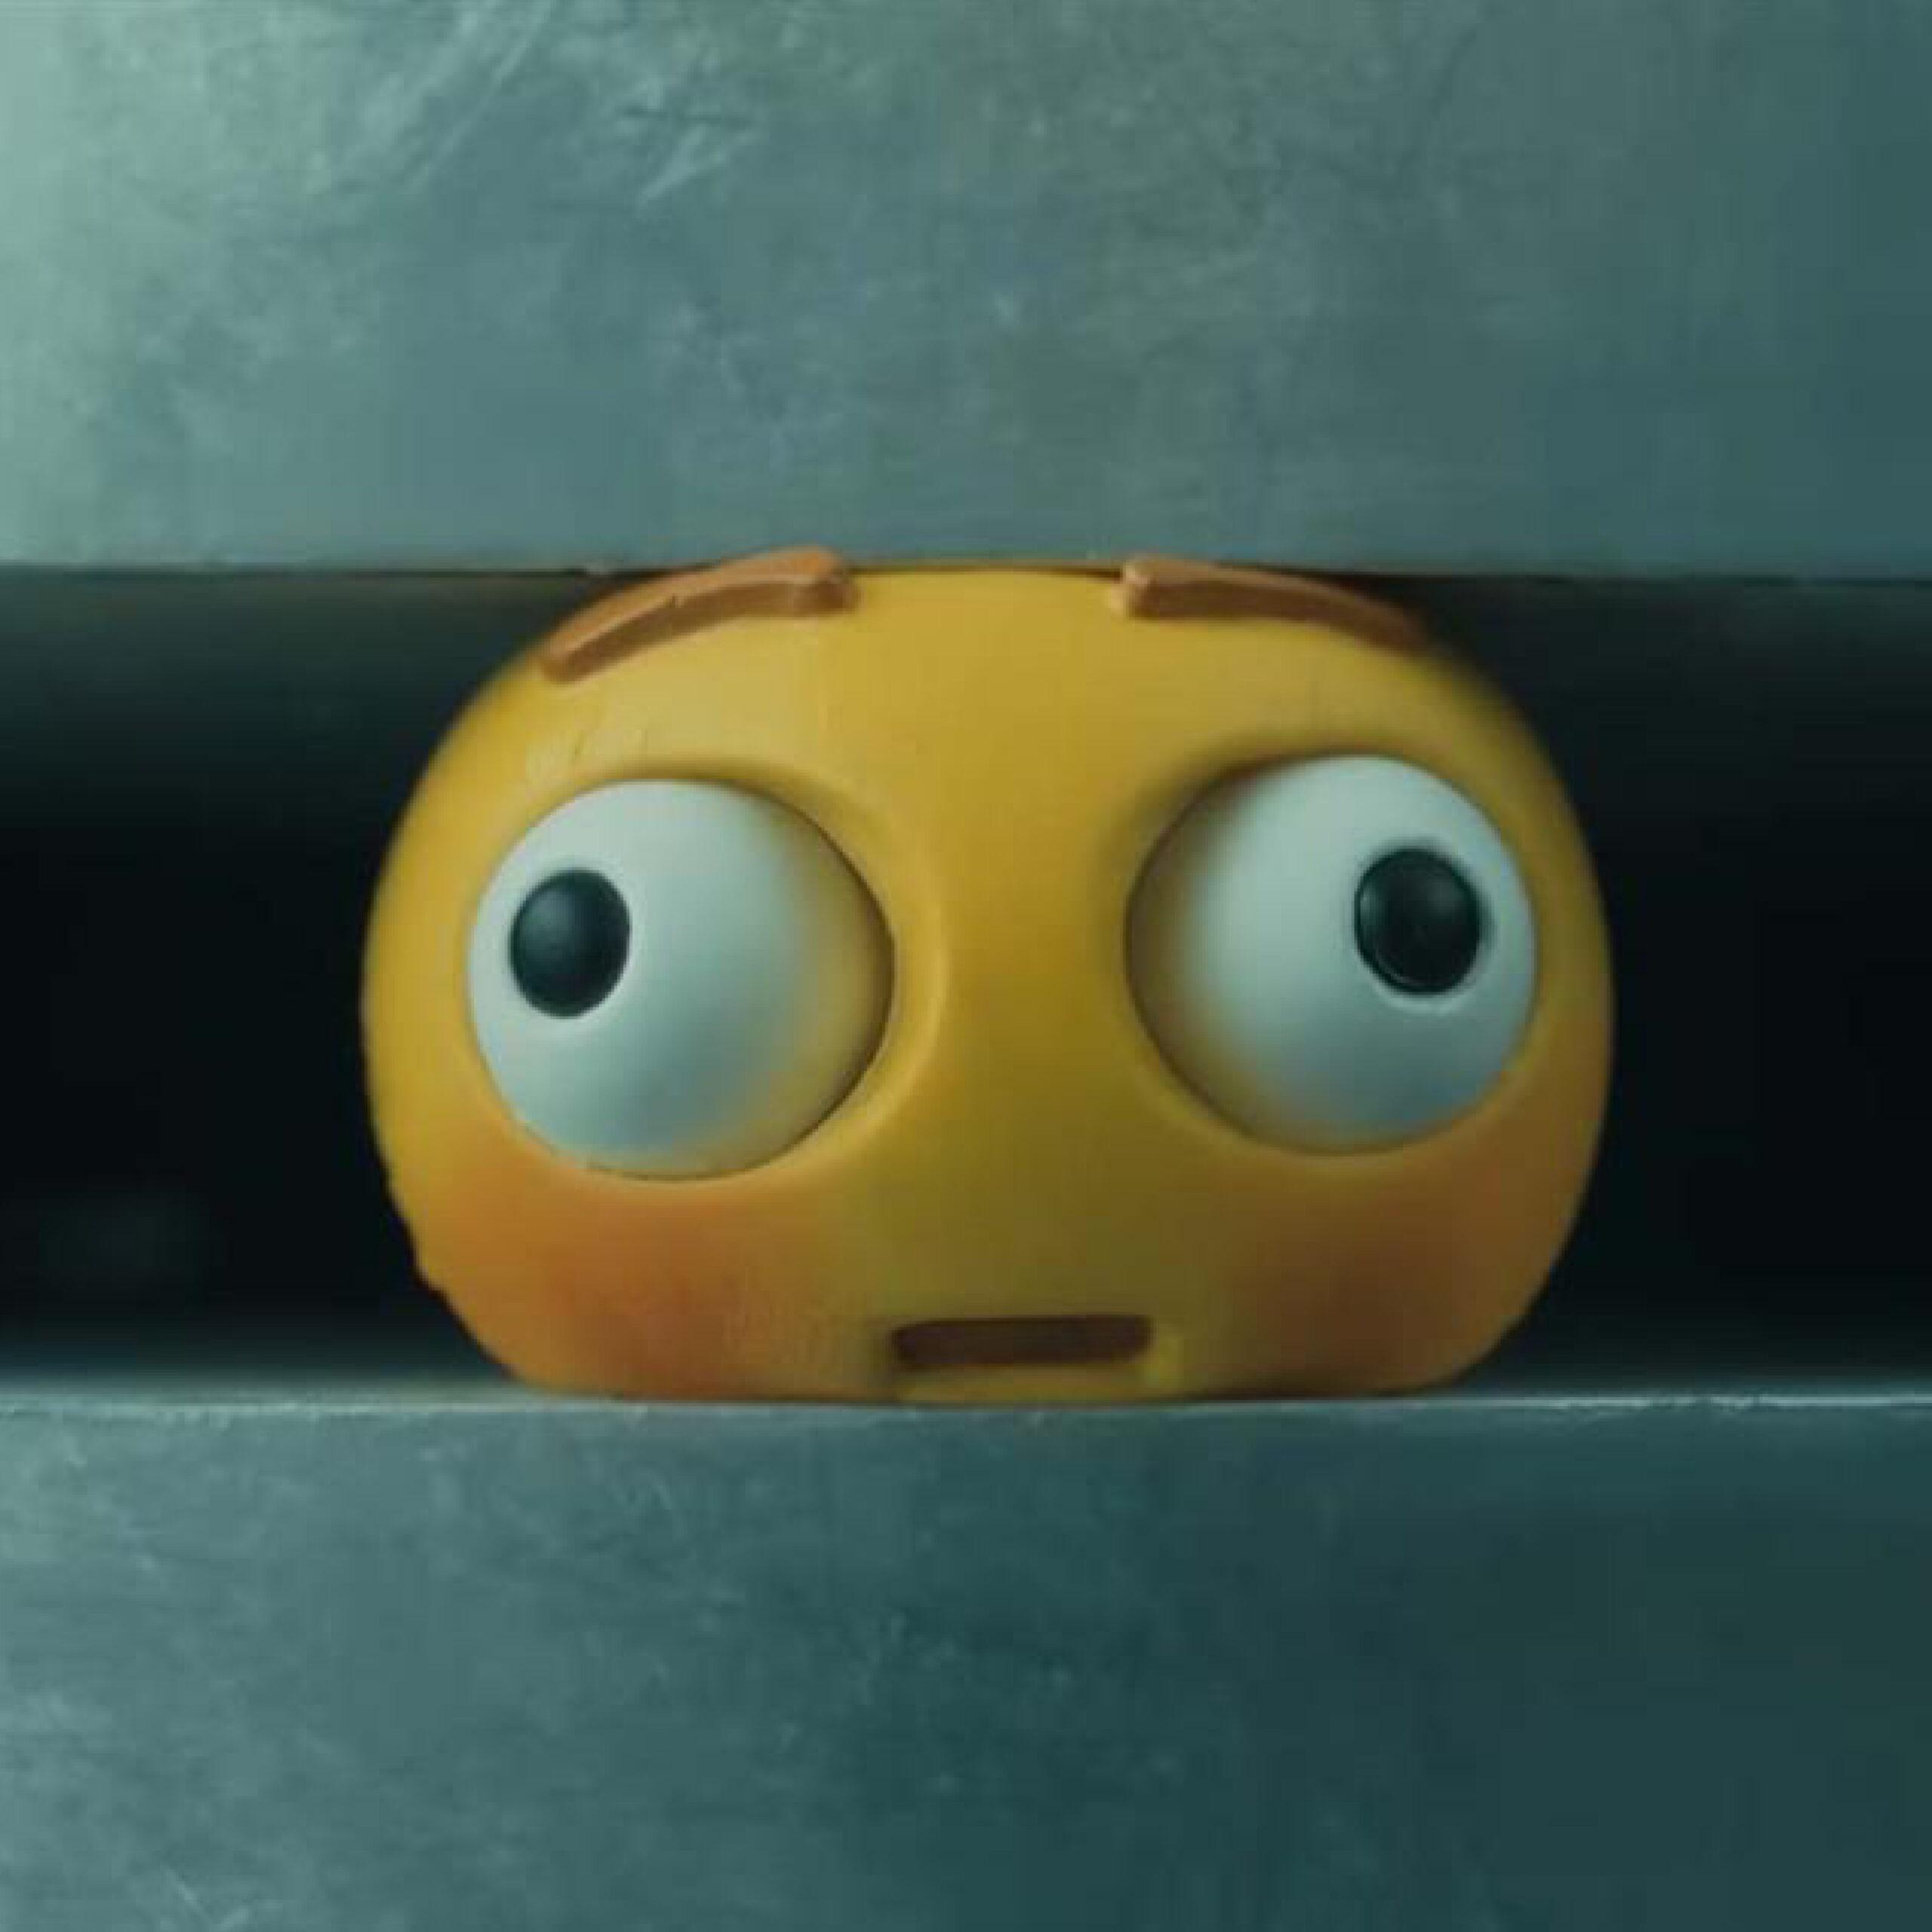 A screenshot of a emoji stress ball being crushed in Apples advert.